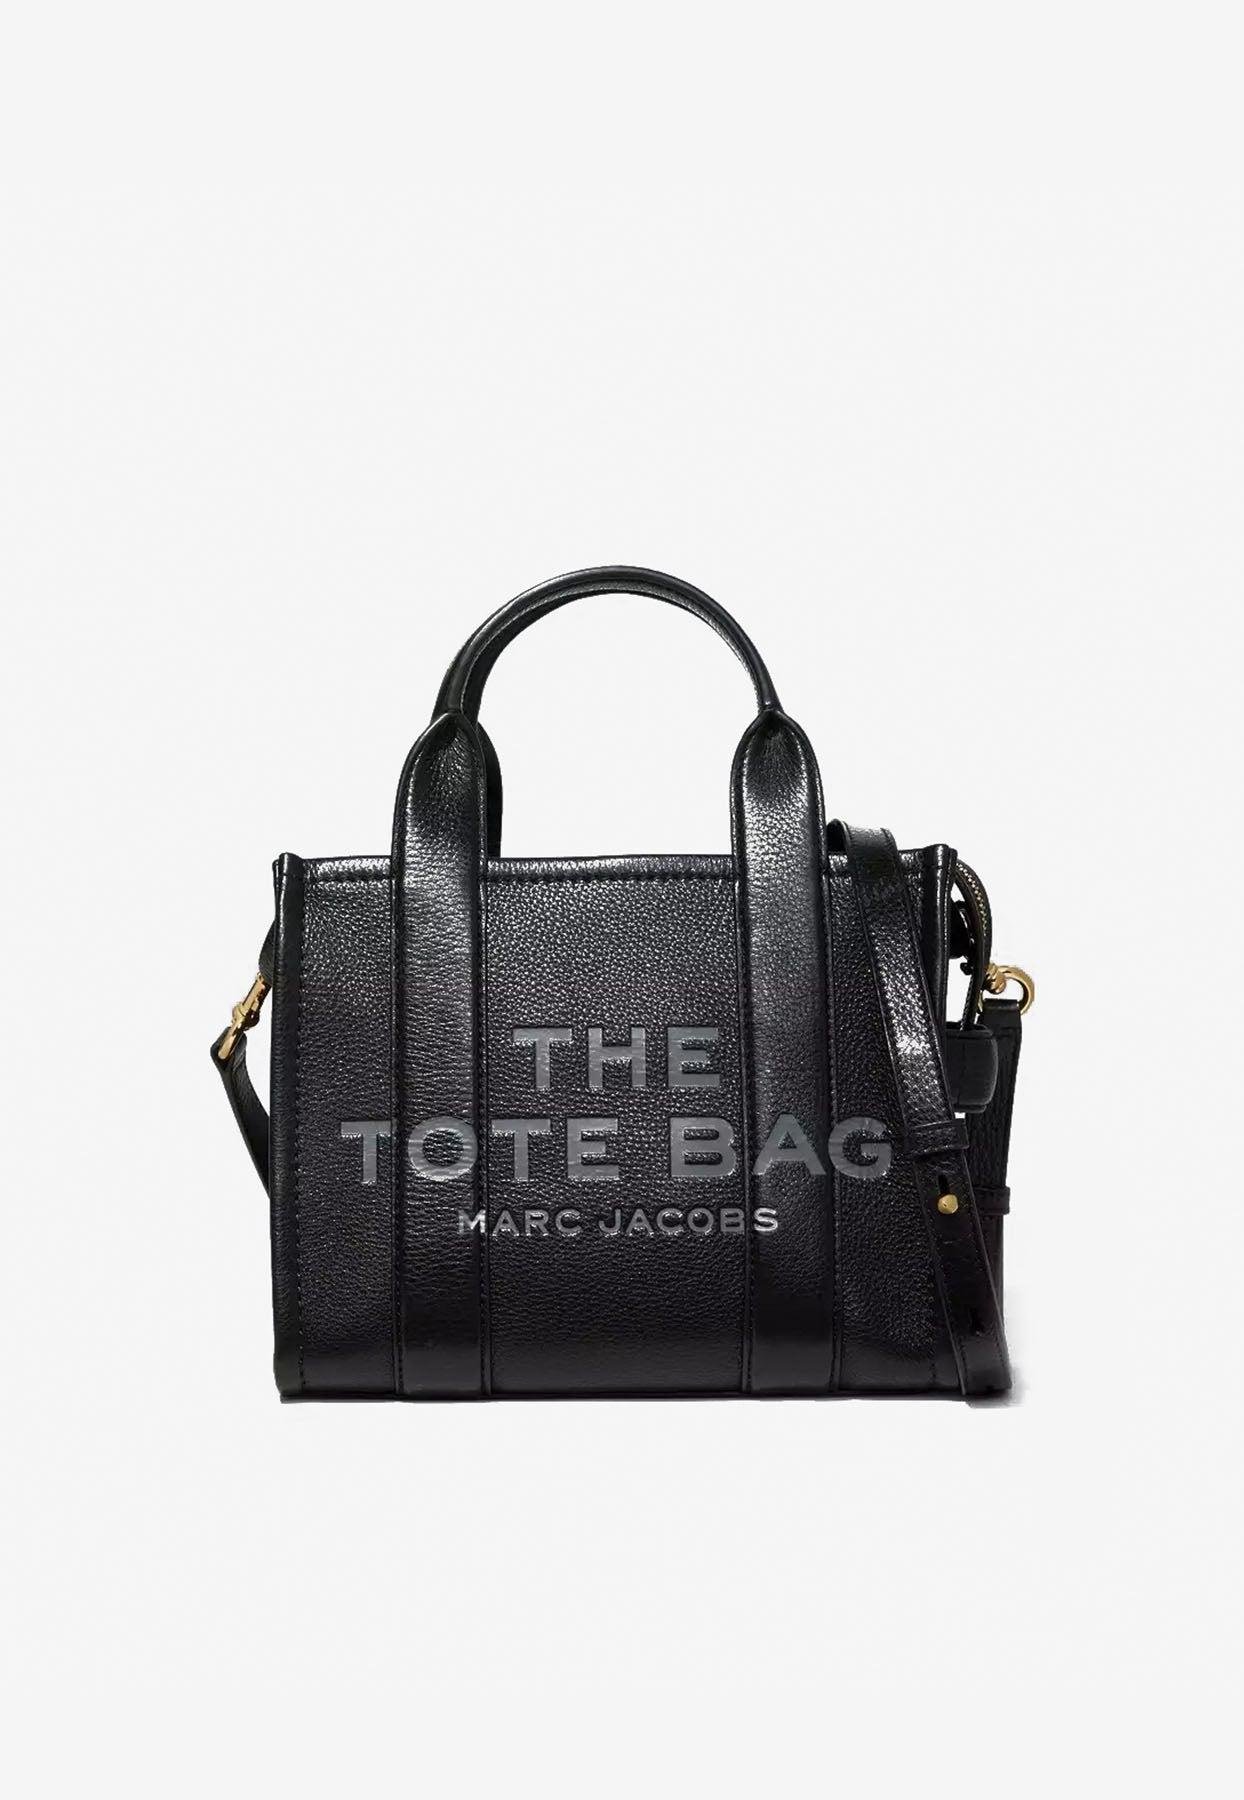 Marc Jacobs Mini Leather Tote Bag in Black | Lyst Canada